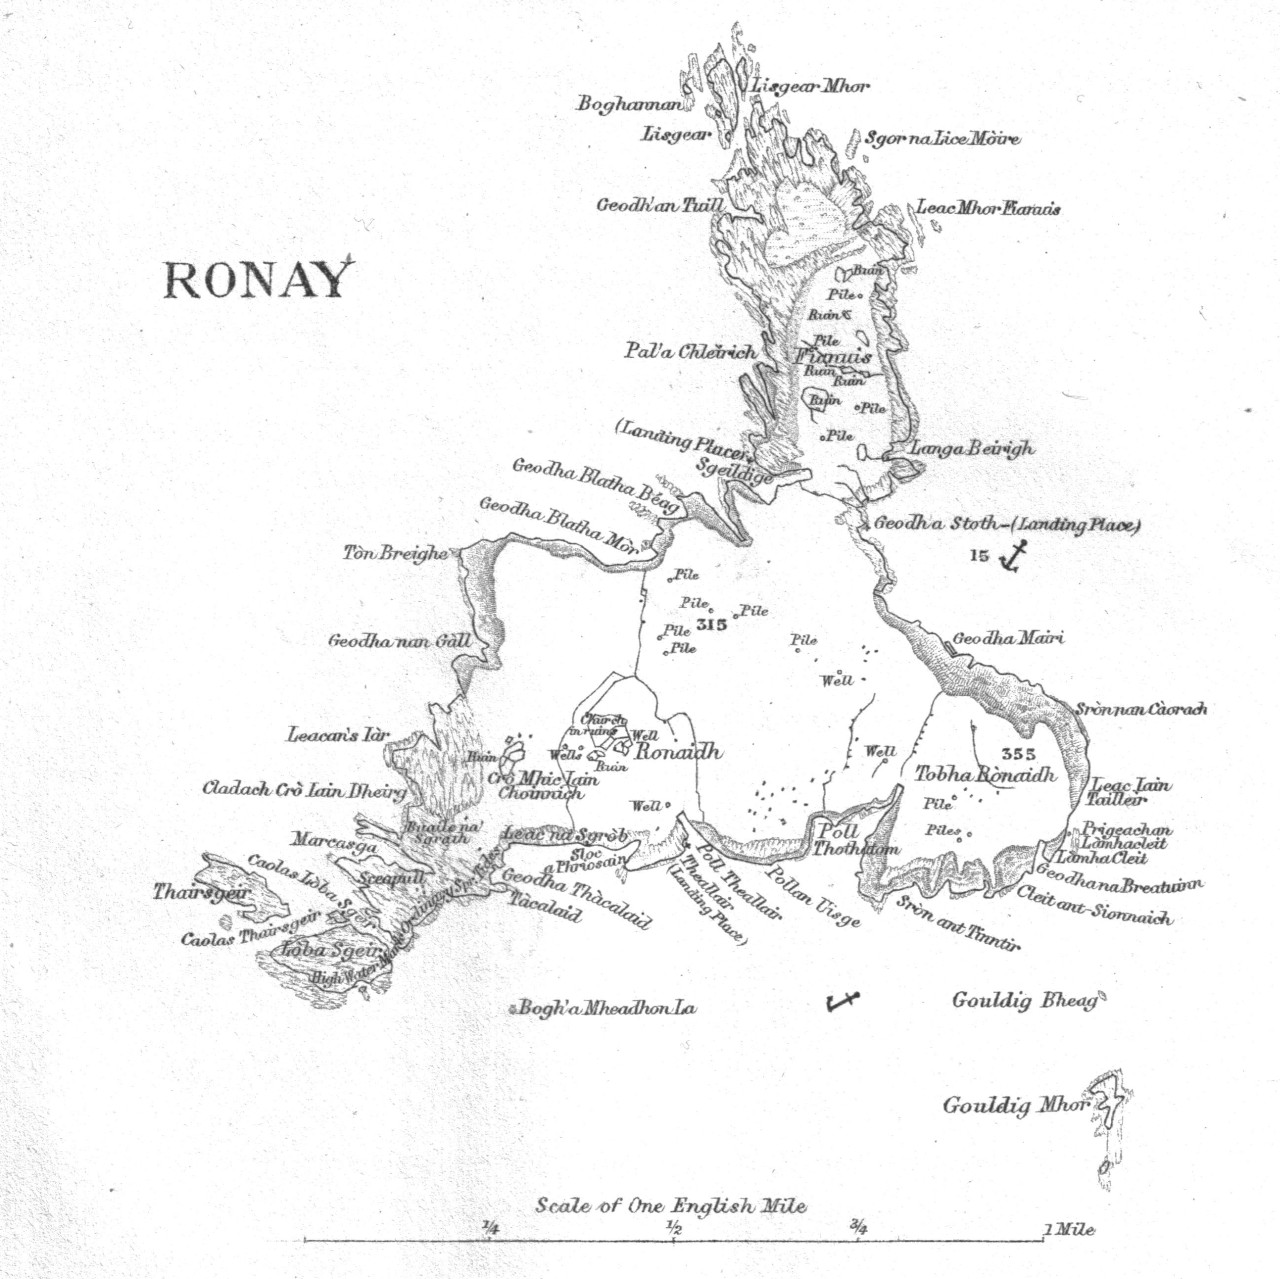 A map of Rona from 1889